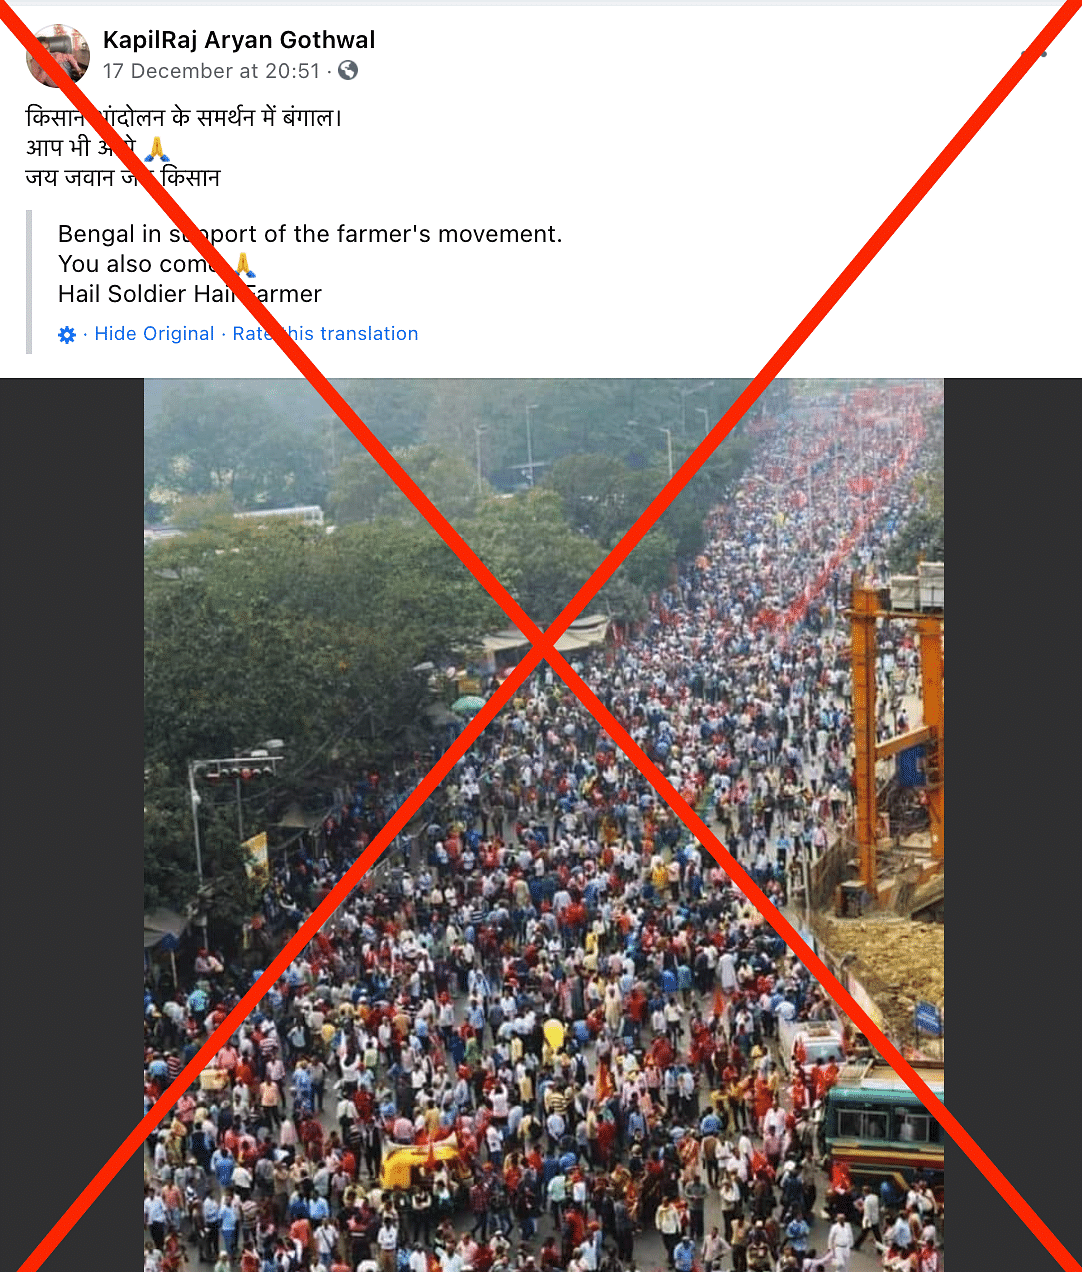 The image is from West Bengal in 2019 when a march was held against the privatisation of PSUs. 